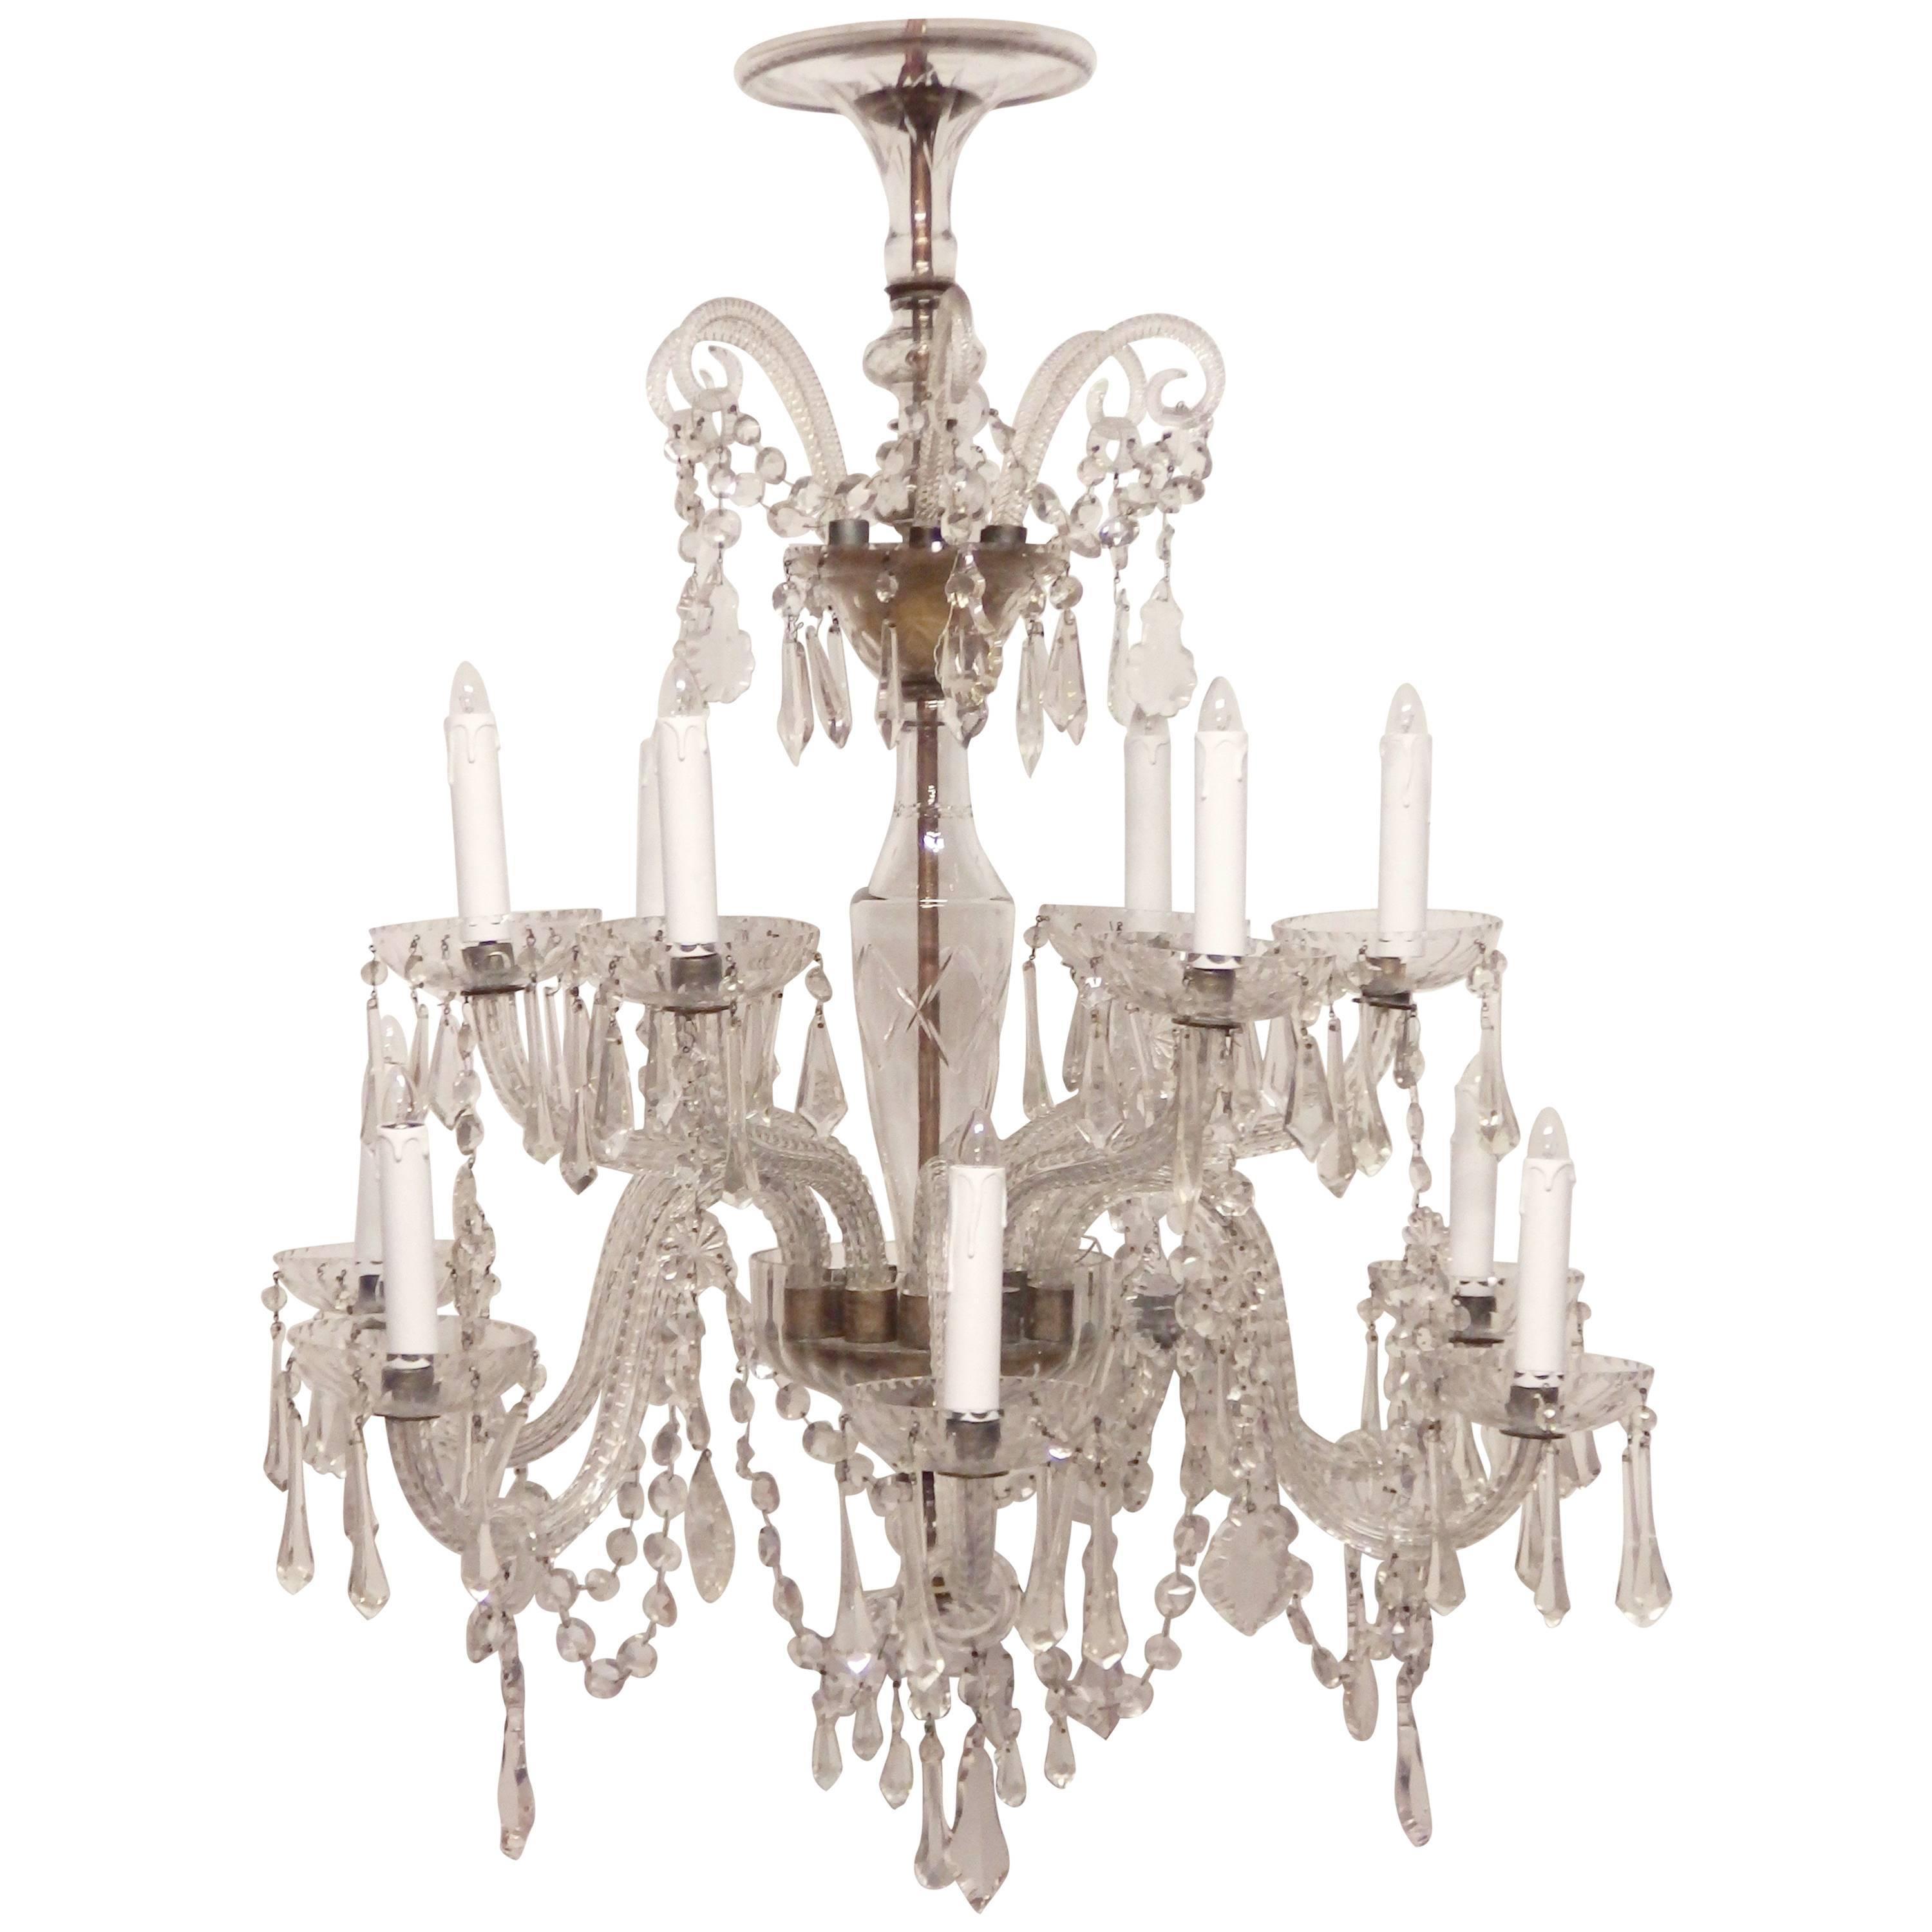 Spanish Cut Glass Chandelier For Sale